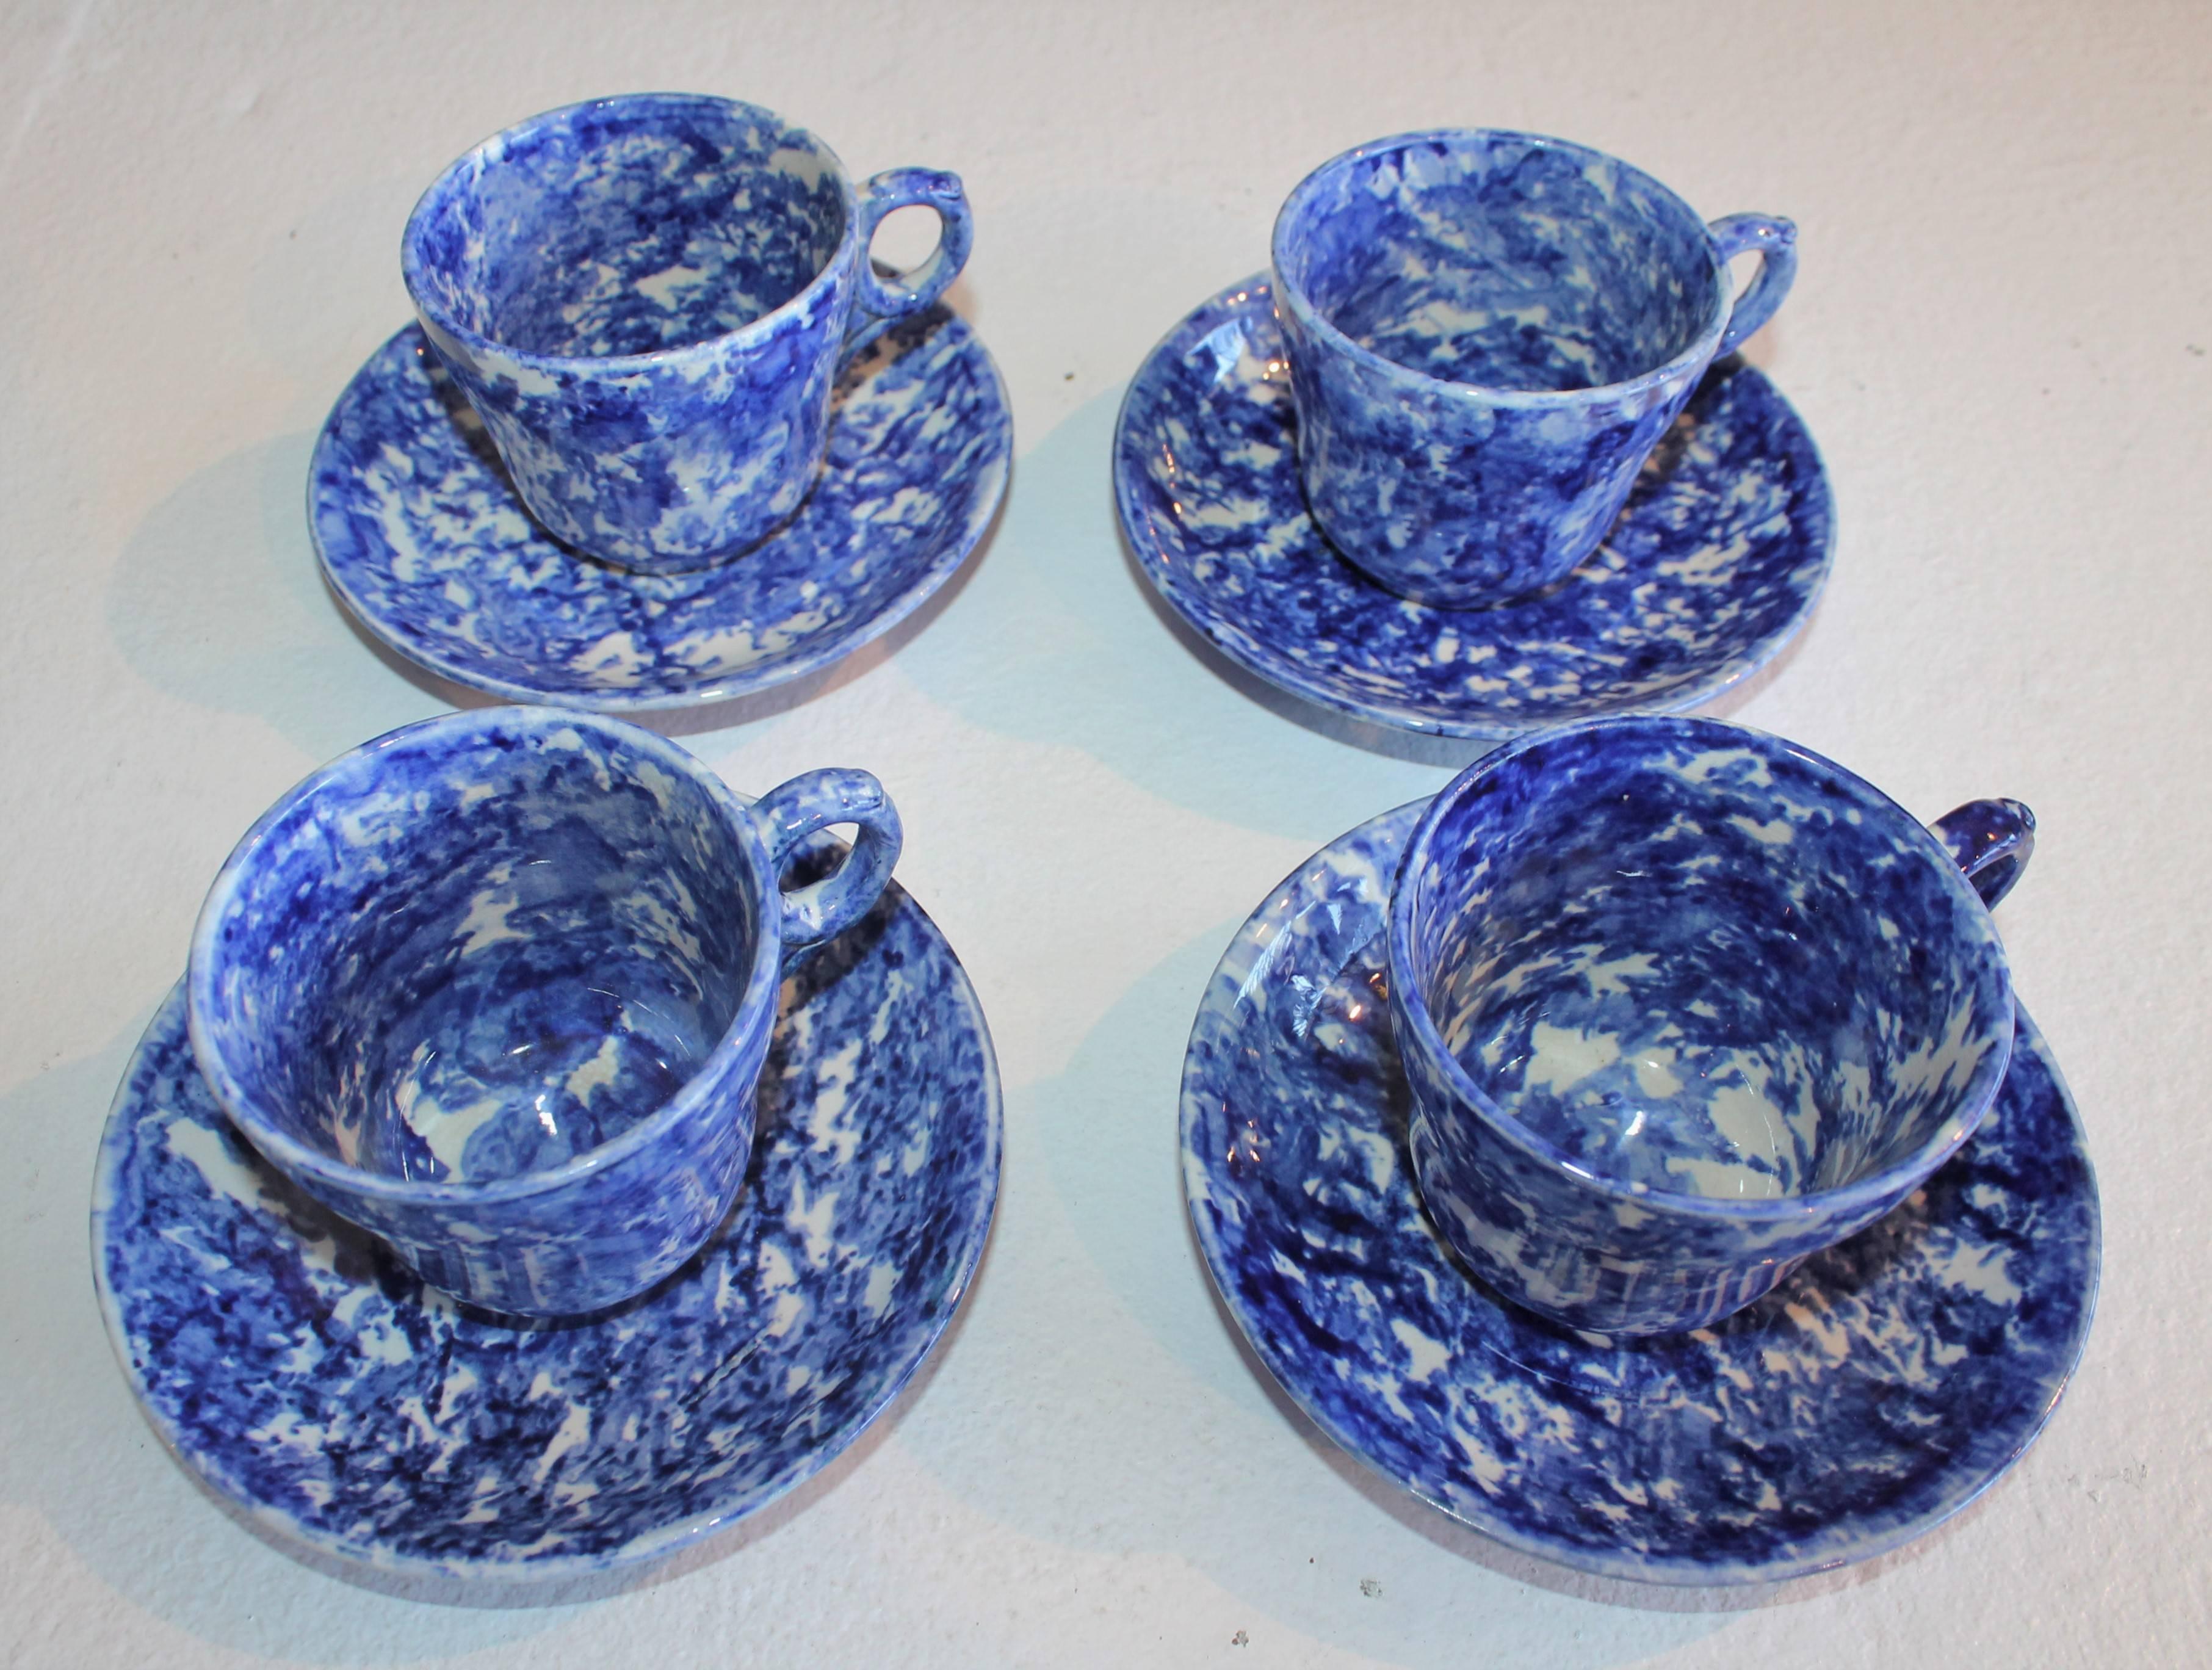 This 19th century matching set of cups and saucers are in pristine condition. This rare set show little wear. This is an amazing blue sponge ware set that was found in Pennsylvania.

Each cup measures- 
3.5